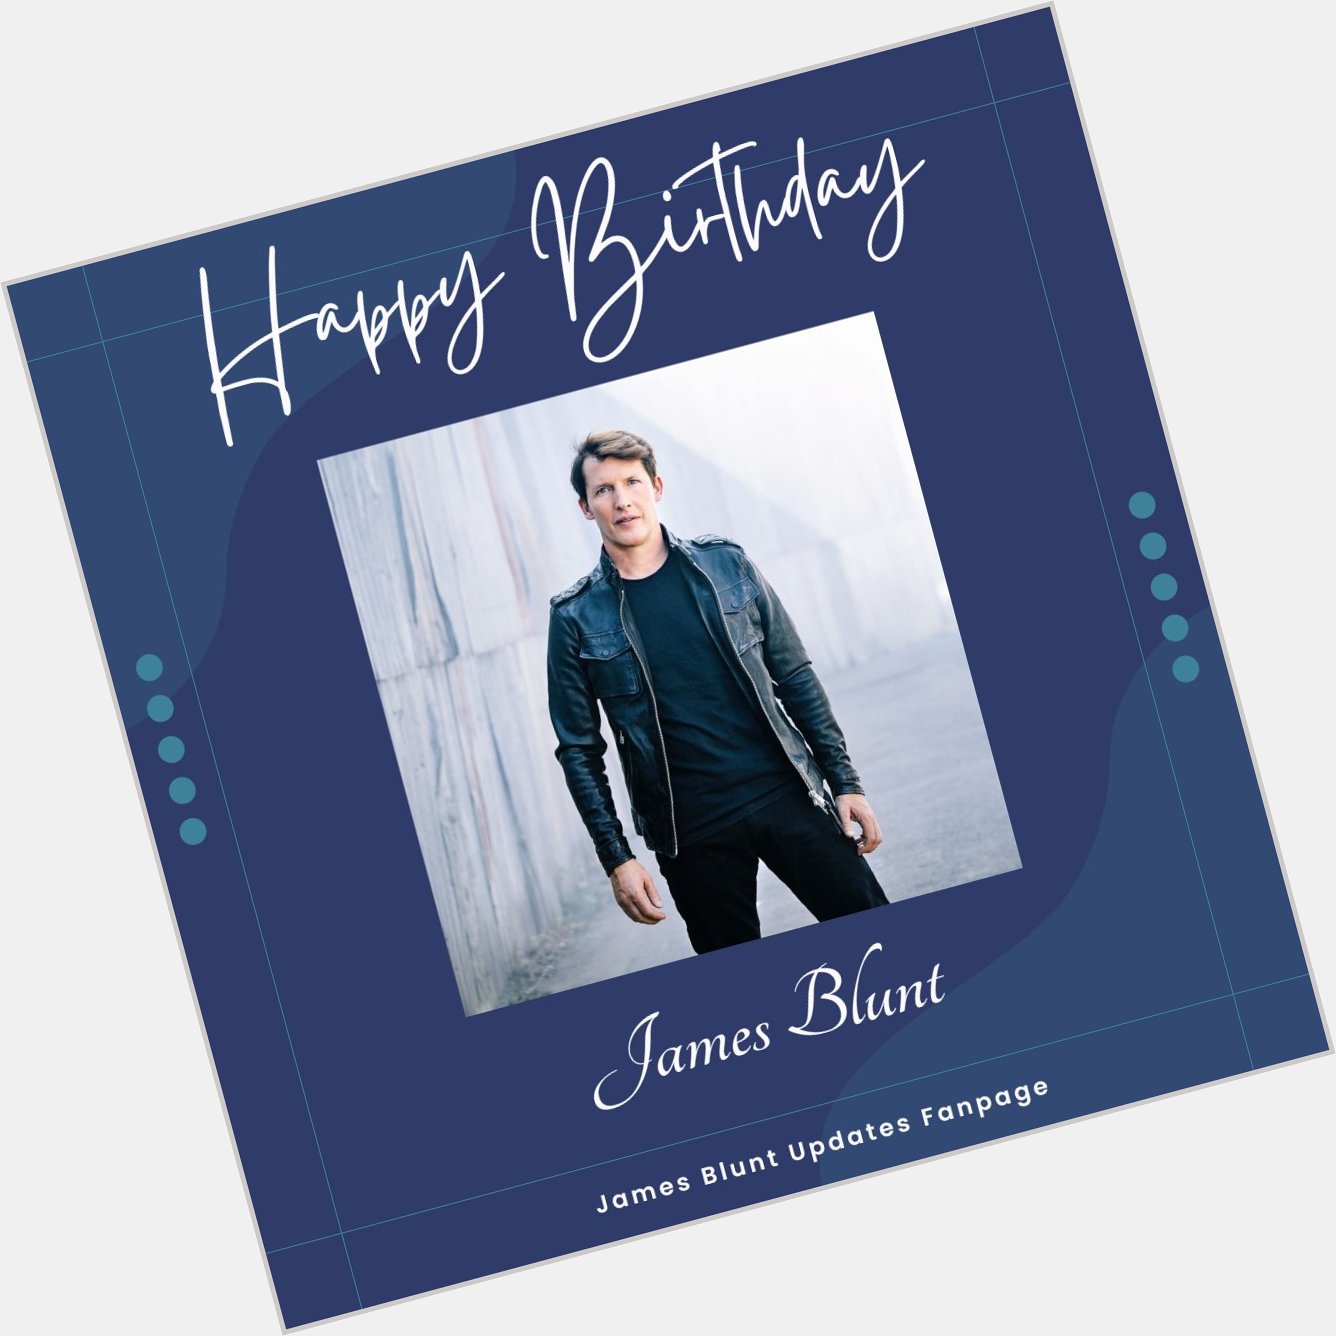 Happy birthday to James Blunt, who turns 49 years old today!      